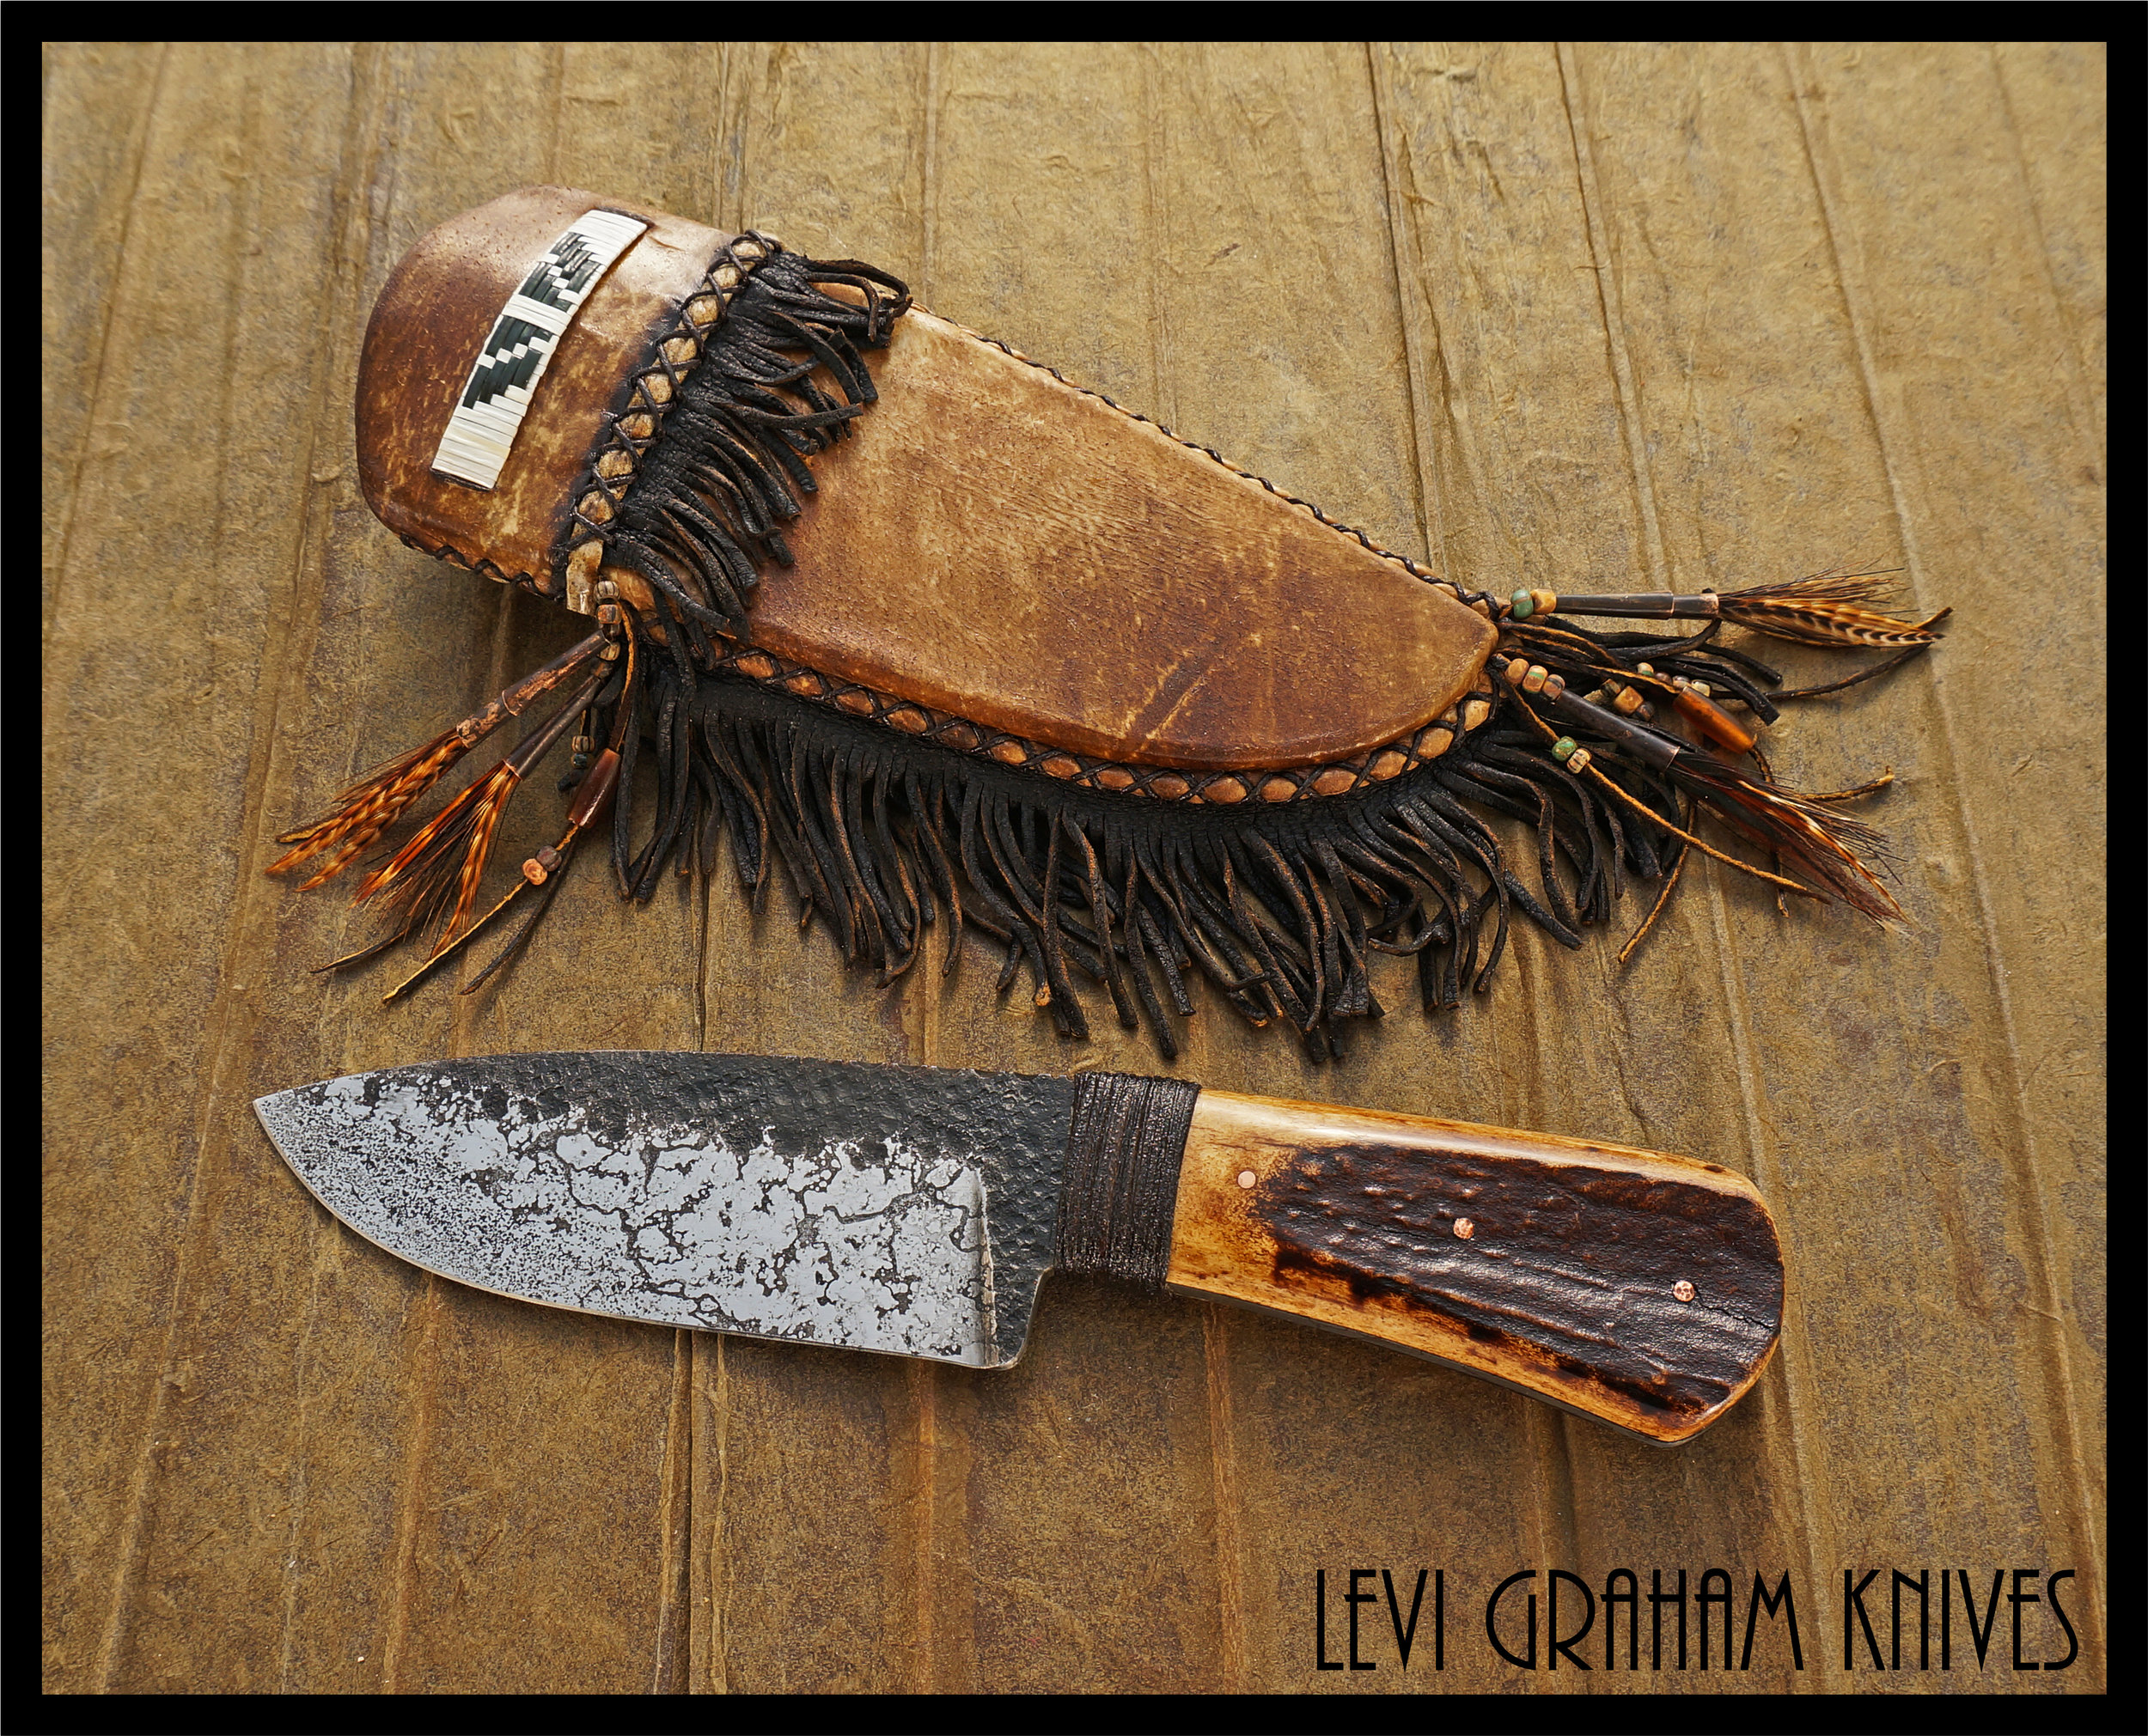 Gallery/Available — Levi Graham Knives